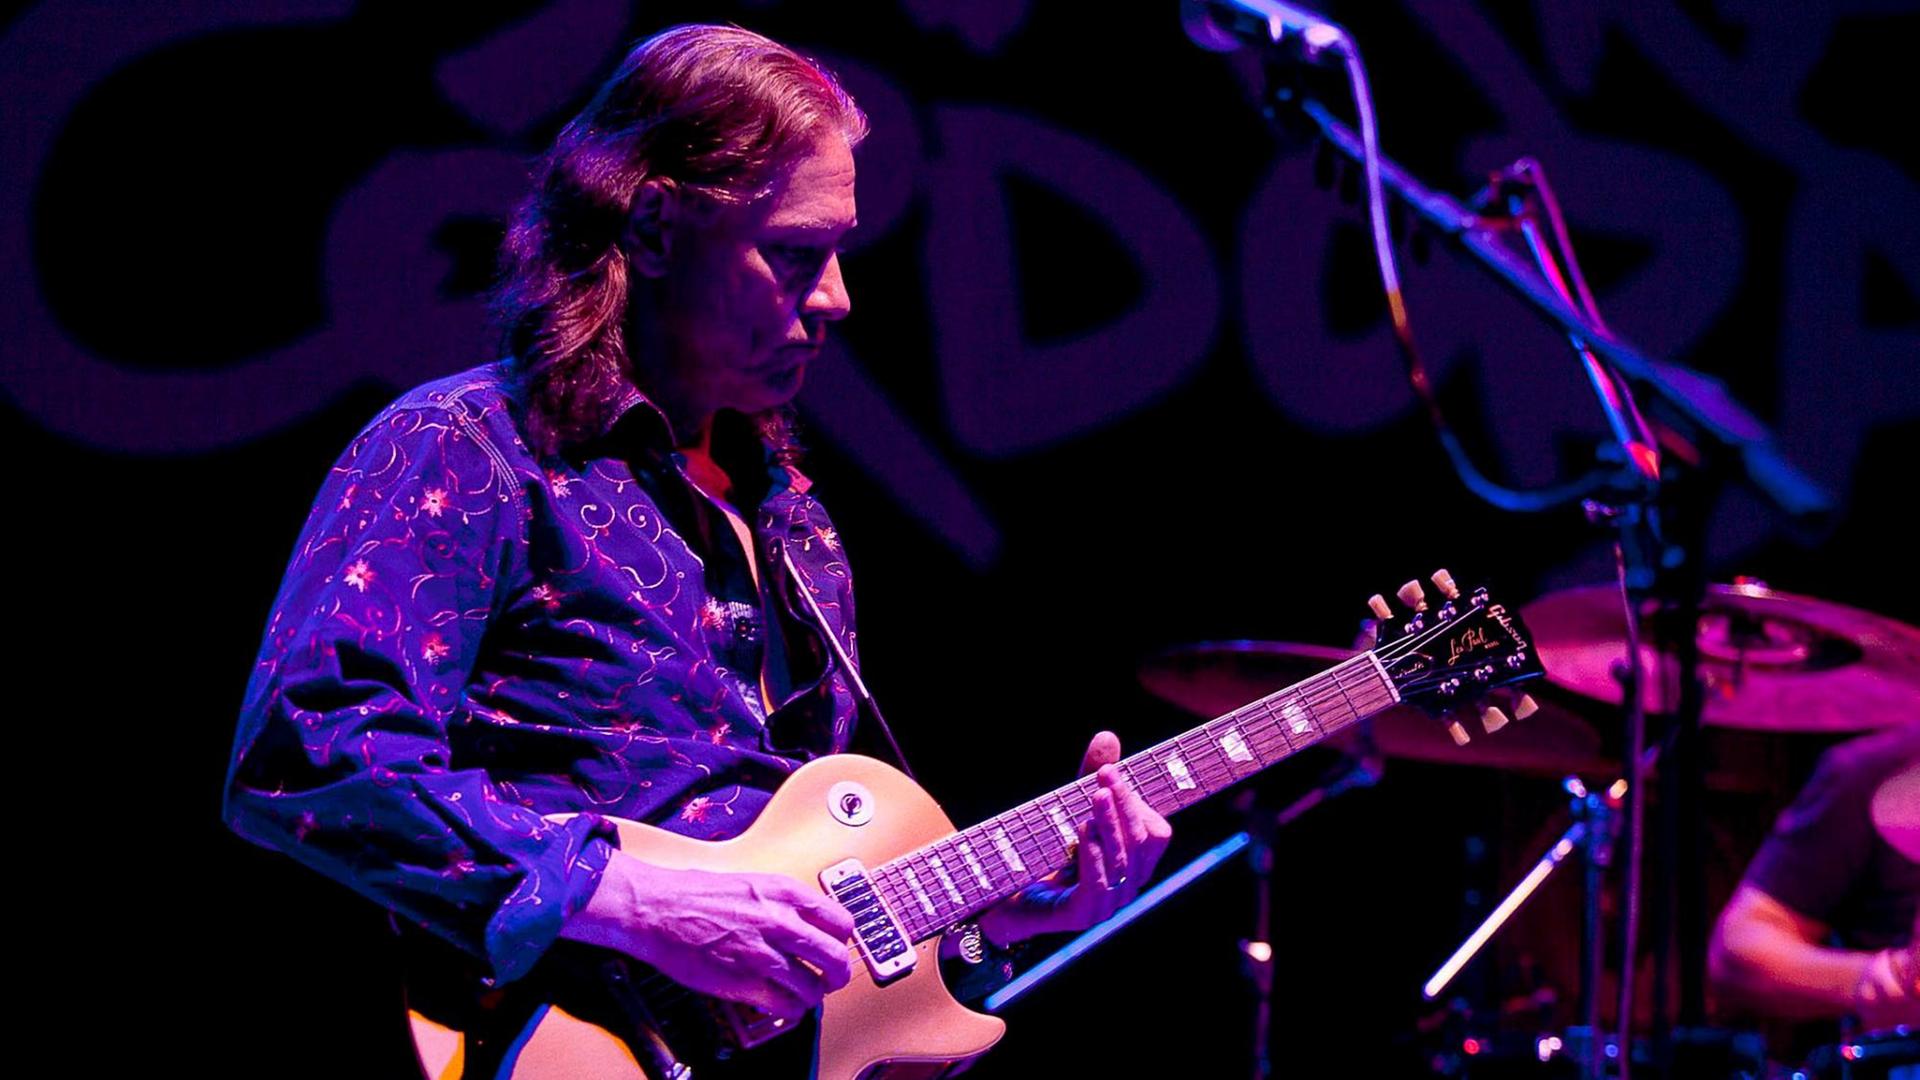 US band 'Renegade Creation' guitarist Robben Ford performs on stage during his 32th Cordoba_s Guitar Festival concert at Axerquia Theatre in Cordoba, southern Spain, 10 July 2012.